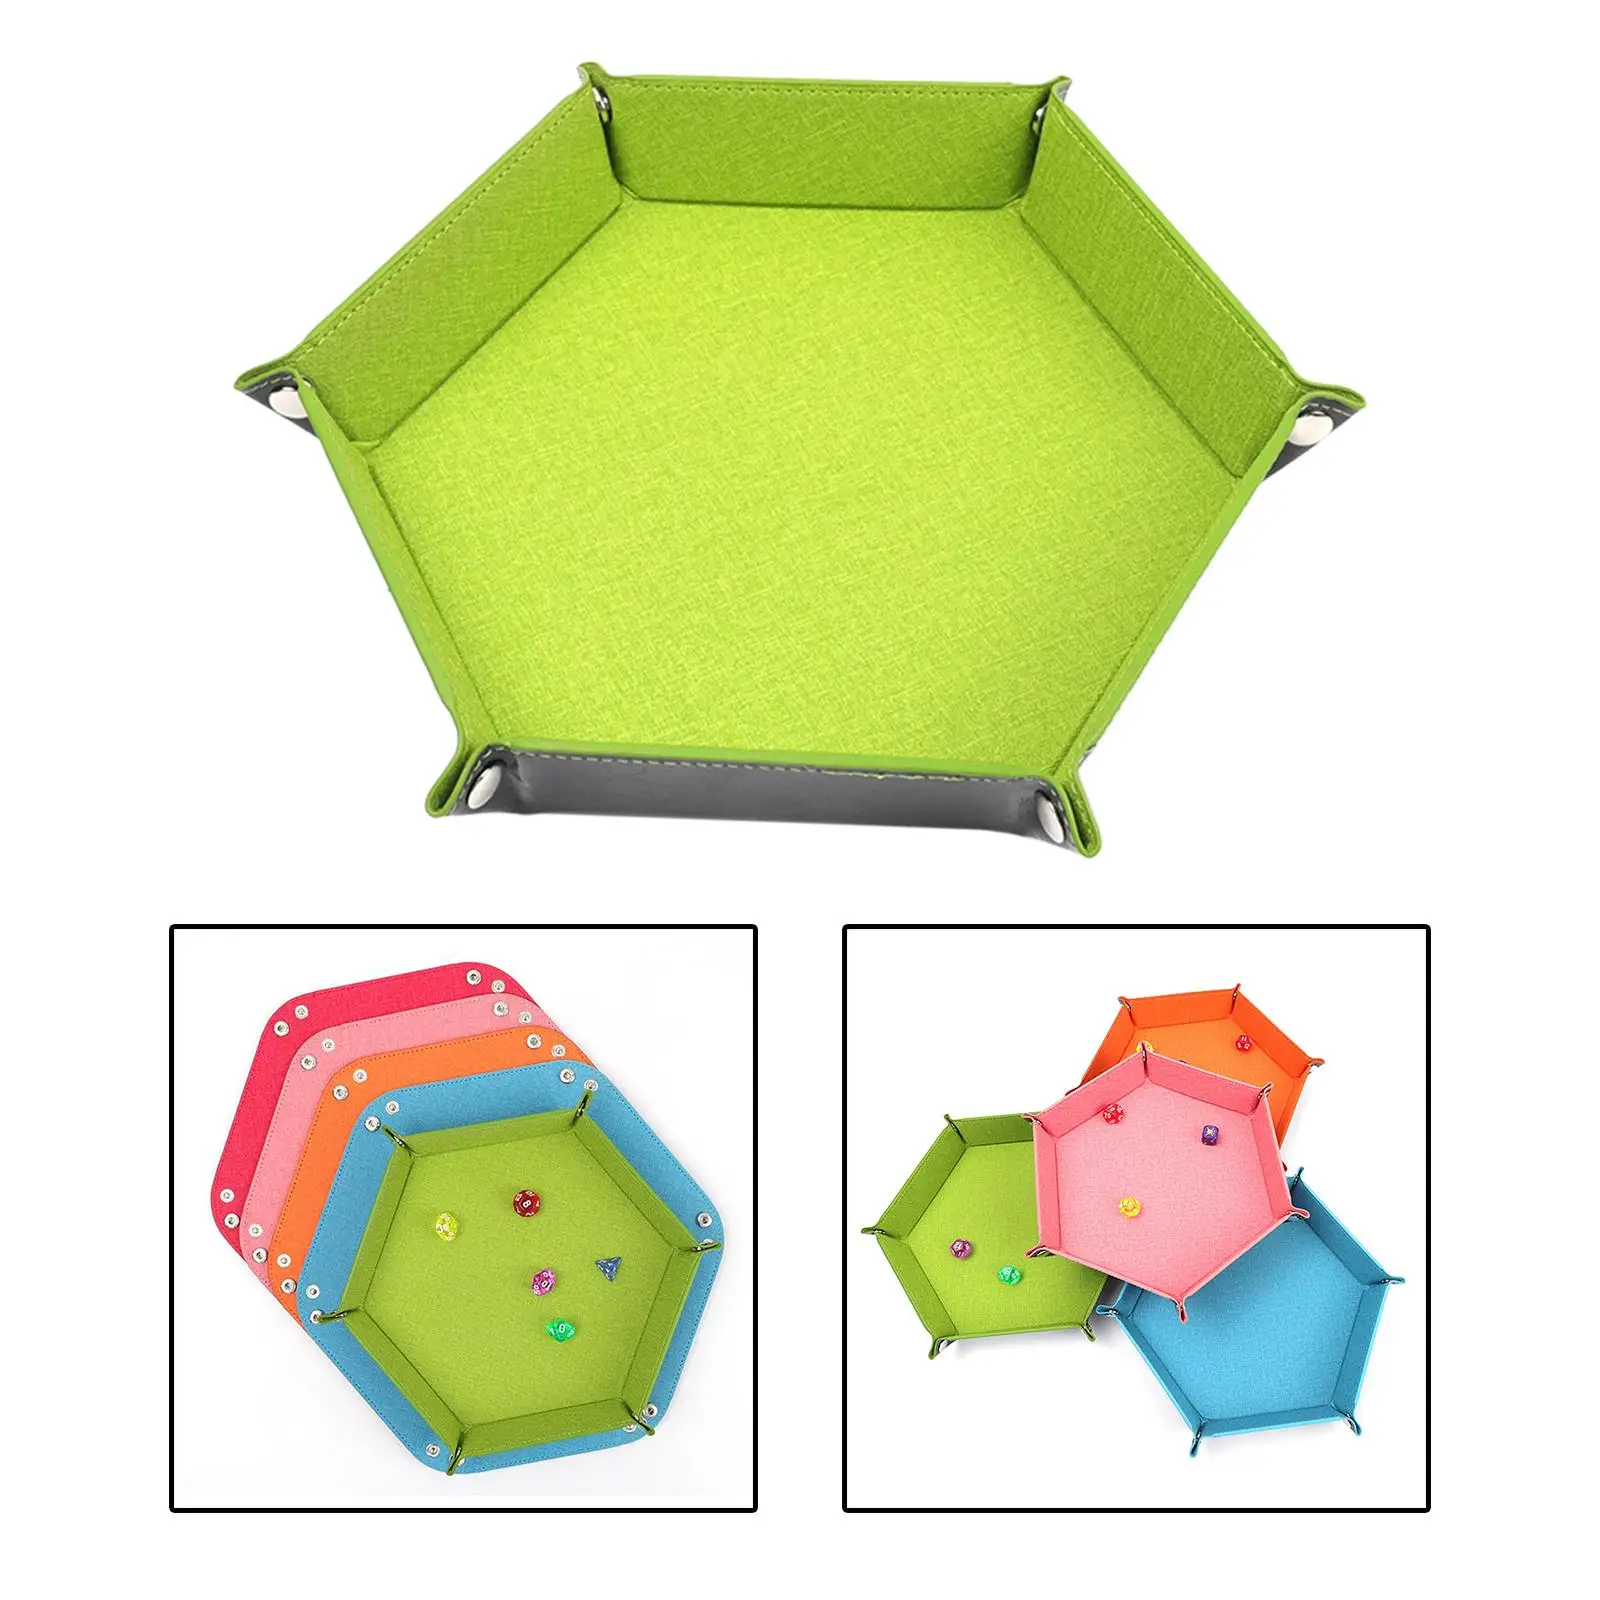 Hexagonal Dice Tray Wearable Multifunctional Double Sided Box Folding Dice Rolling Tray for Snacks Stuff Keys Candies